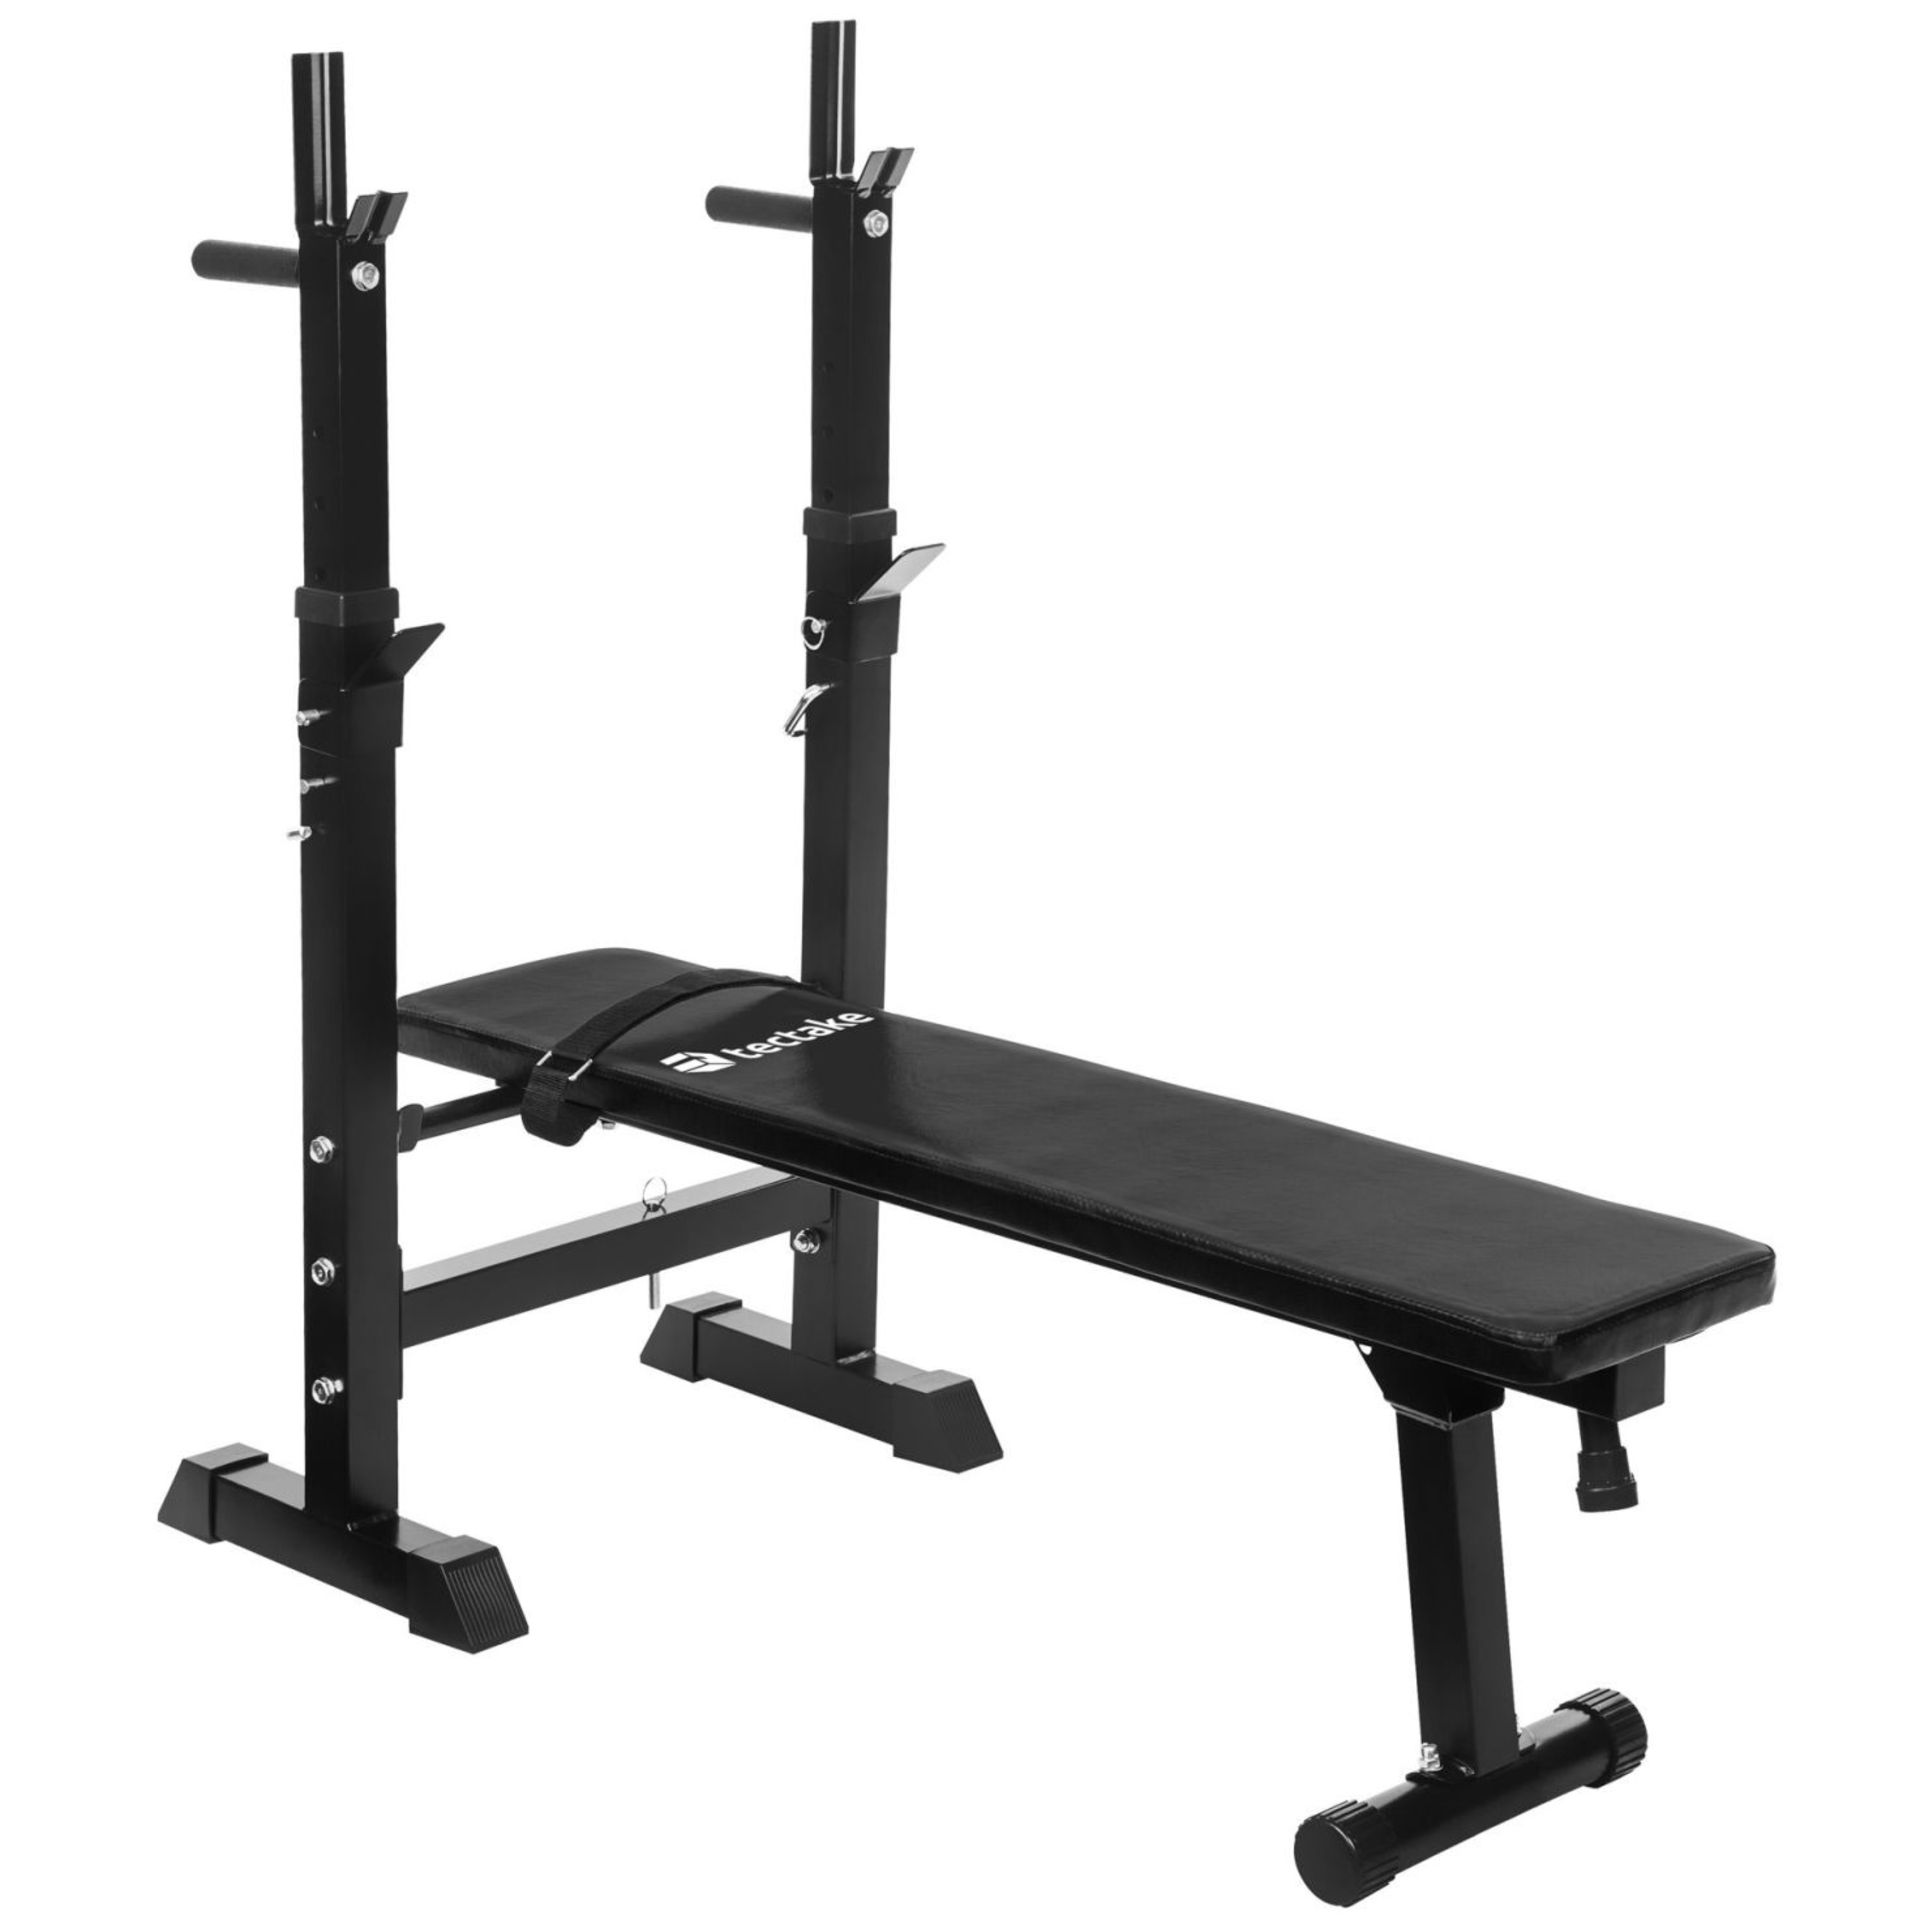 Tectake - Weight Bench With Barbell Rack Black - Boxed. RRP £58.99 - Image 2 of 2